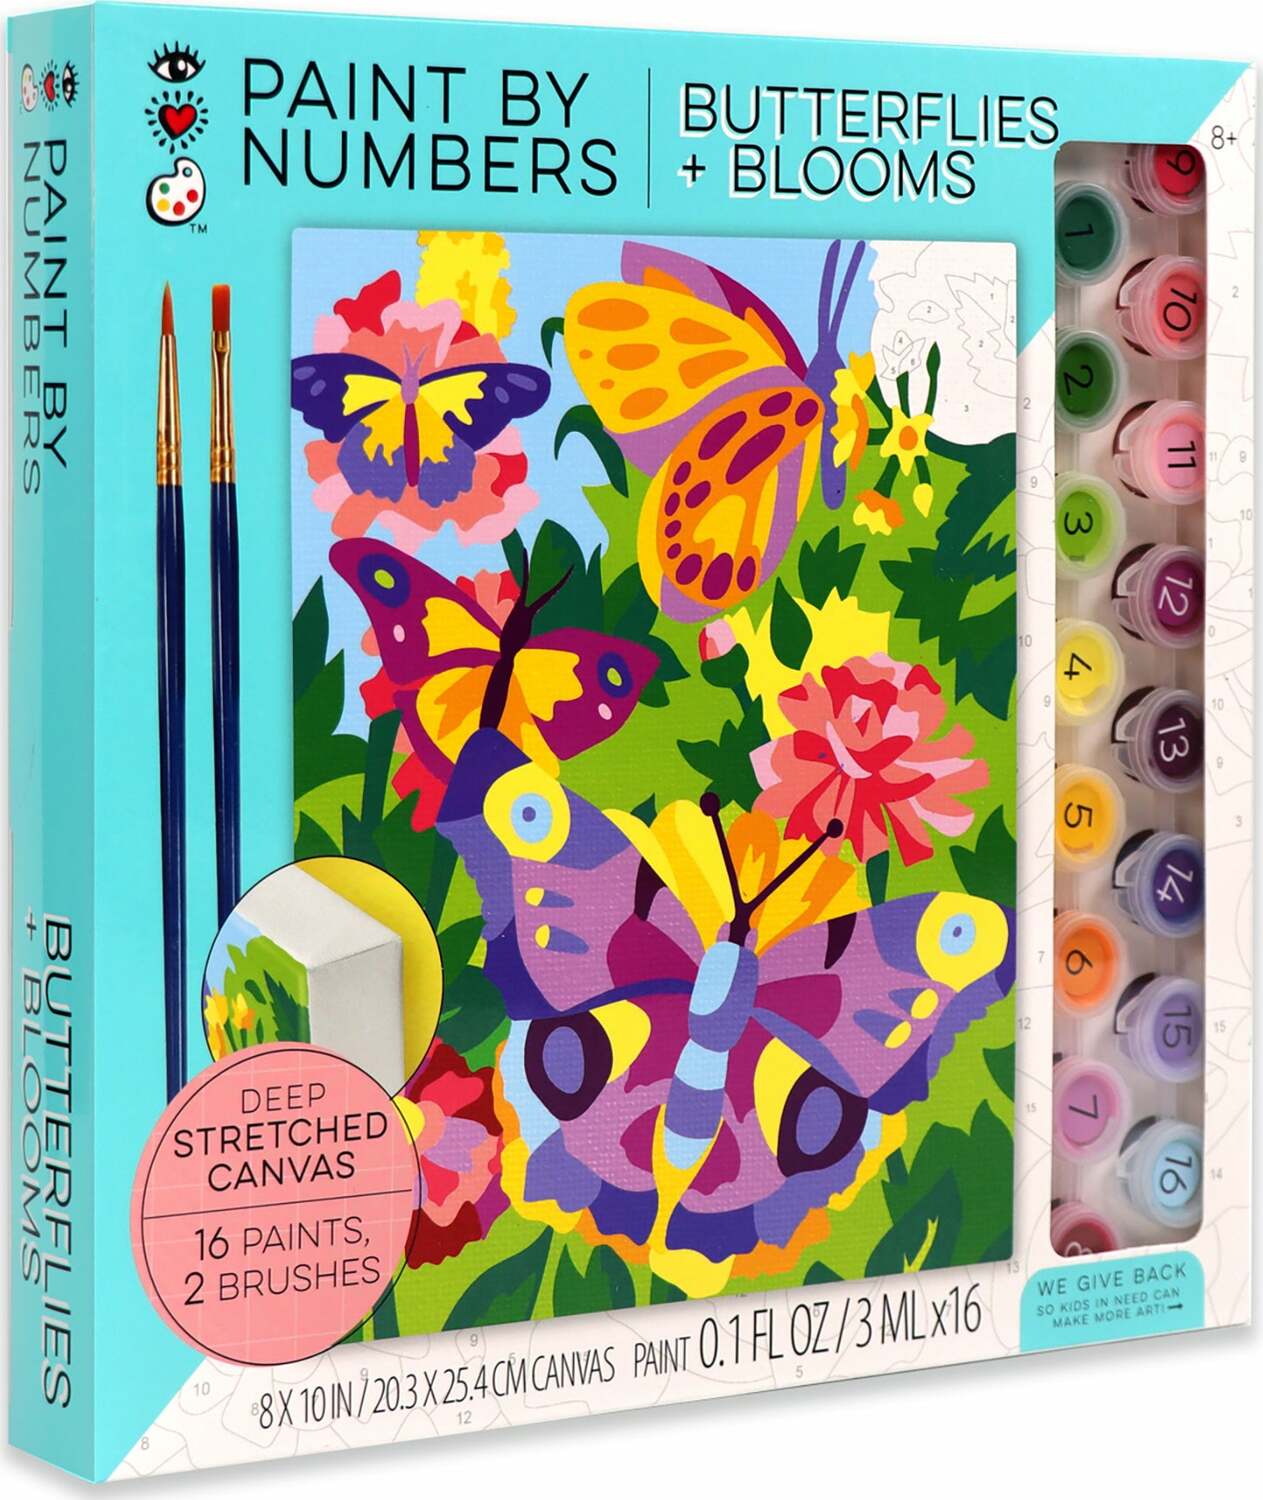 iHeartArt Paint by Numbers Butterflies + Blooms – brightstripes